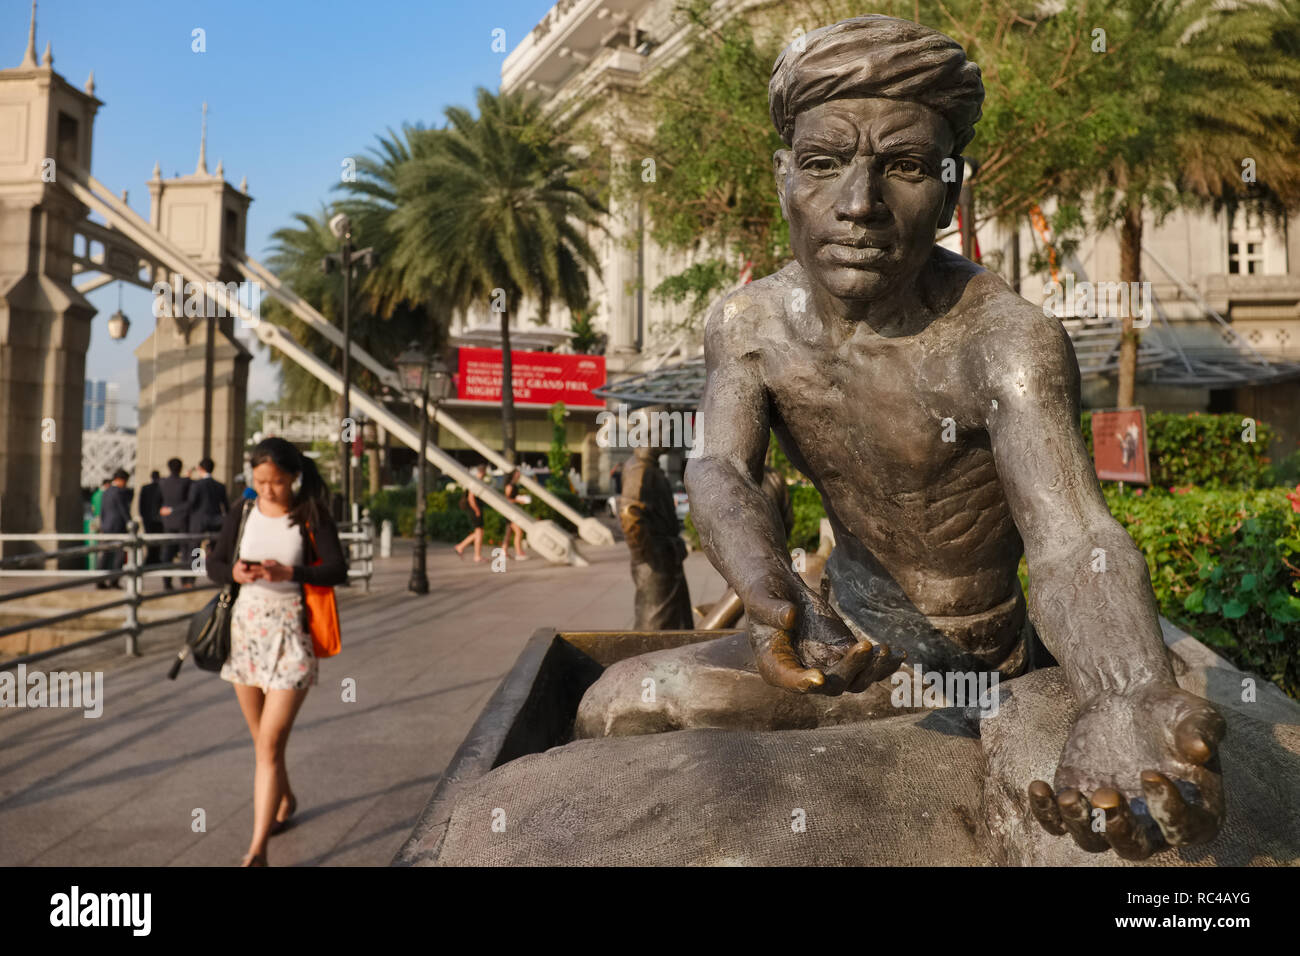 A bronze sculpture in the People of the River series by the Singapore River, depicting a porter of old about to be handed a sack of goods; Singapore Stock Photo